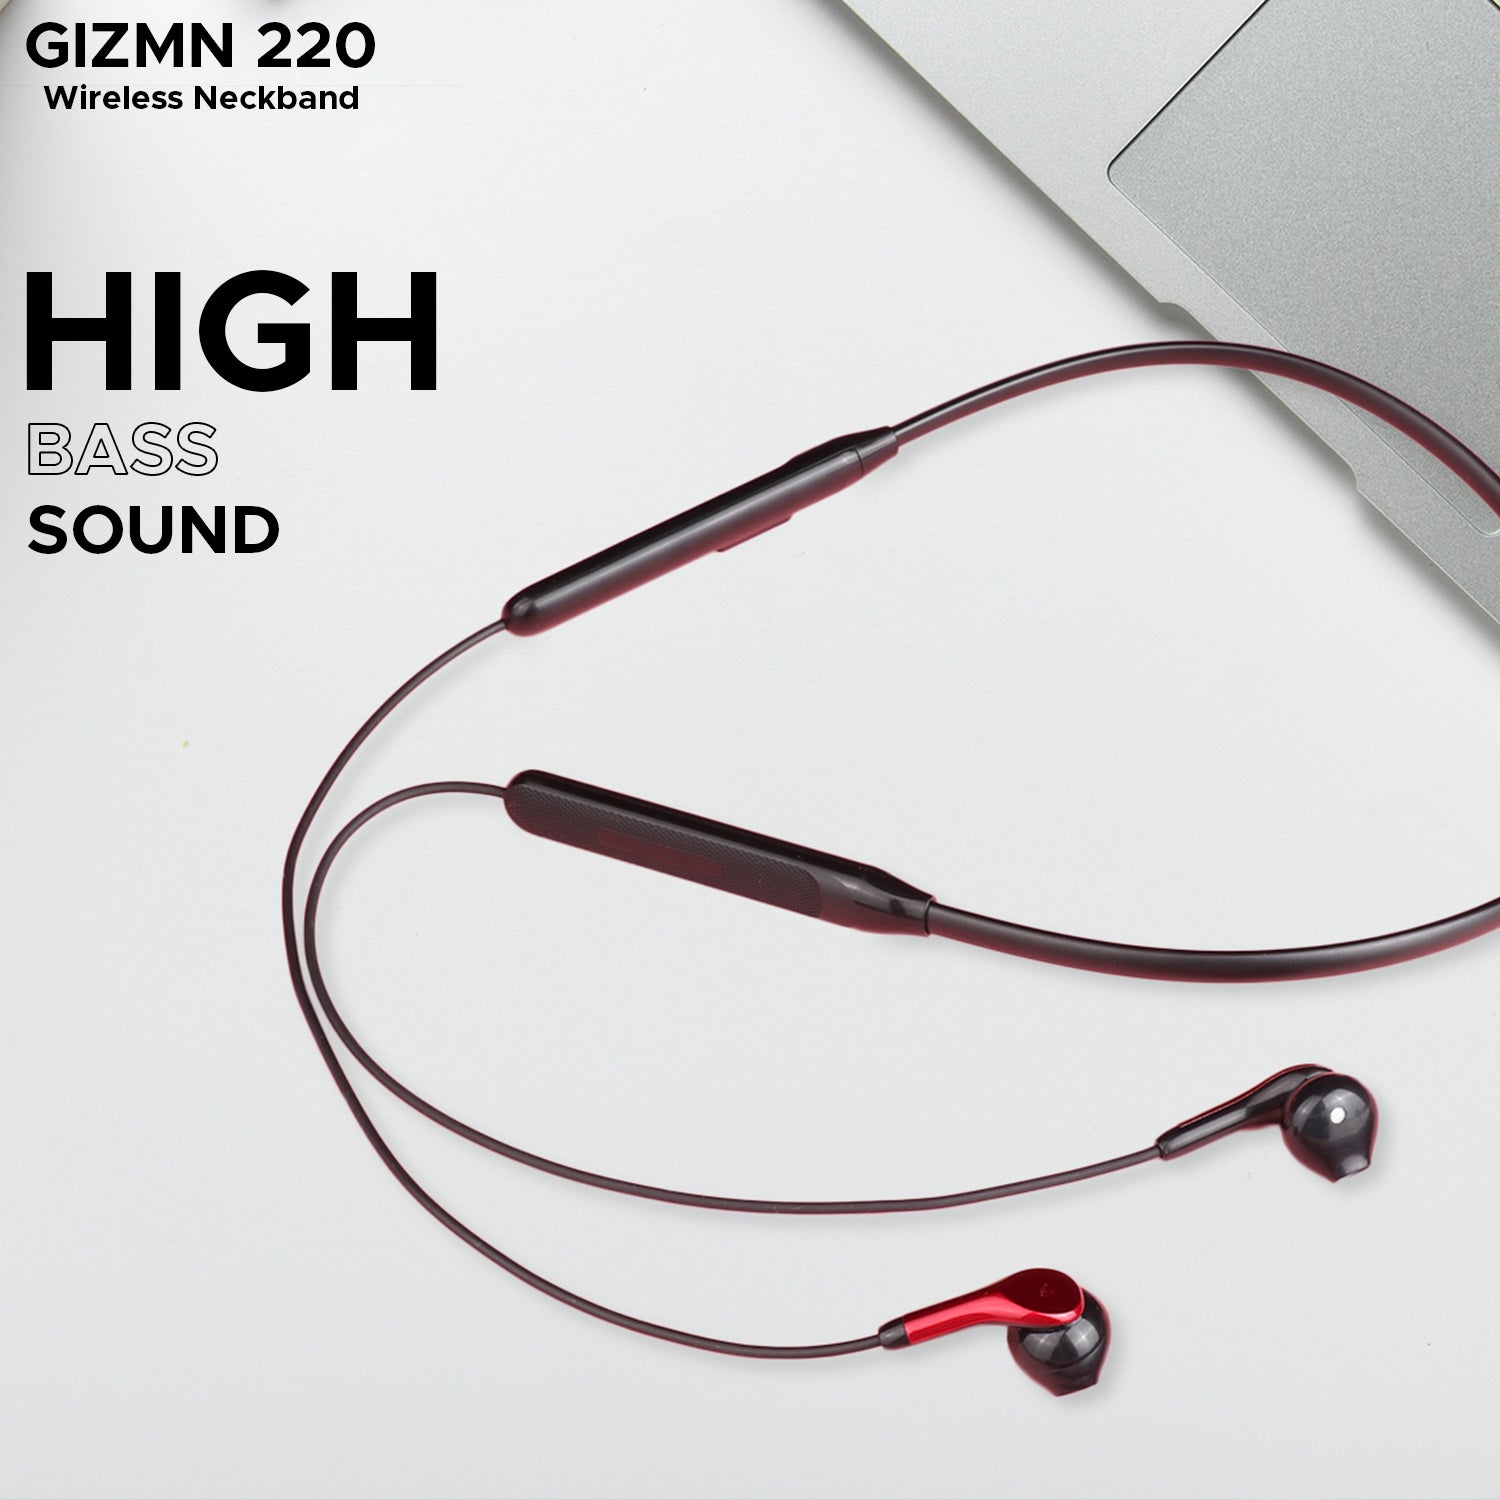 GIZMORE MN220 Wireless Bluetooth 5.0 in Ear Neckband| 20 Hours Playtime| 10 Min Charging Work Upto 2 hrs| Dual Pairing|360 Degree Surround Stereo| HD Microphone & Magnetic Earphone